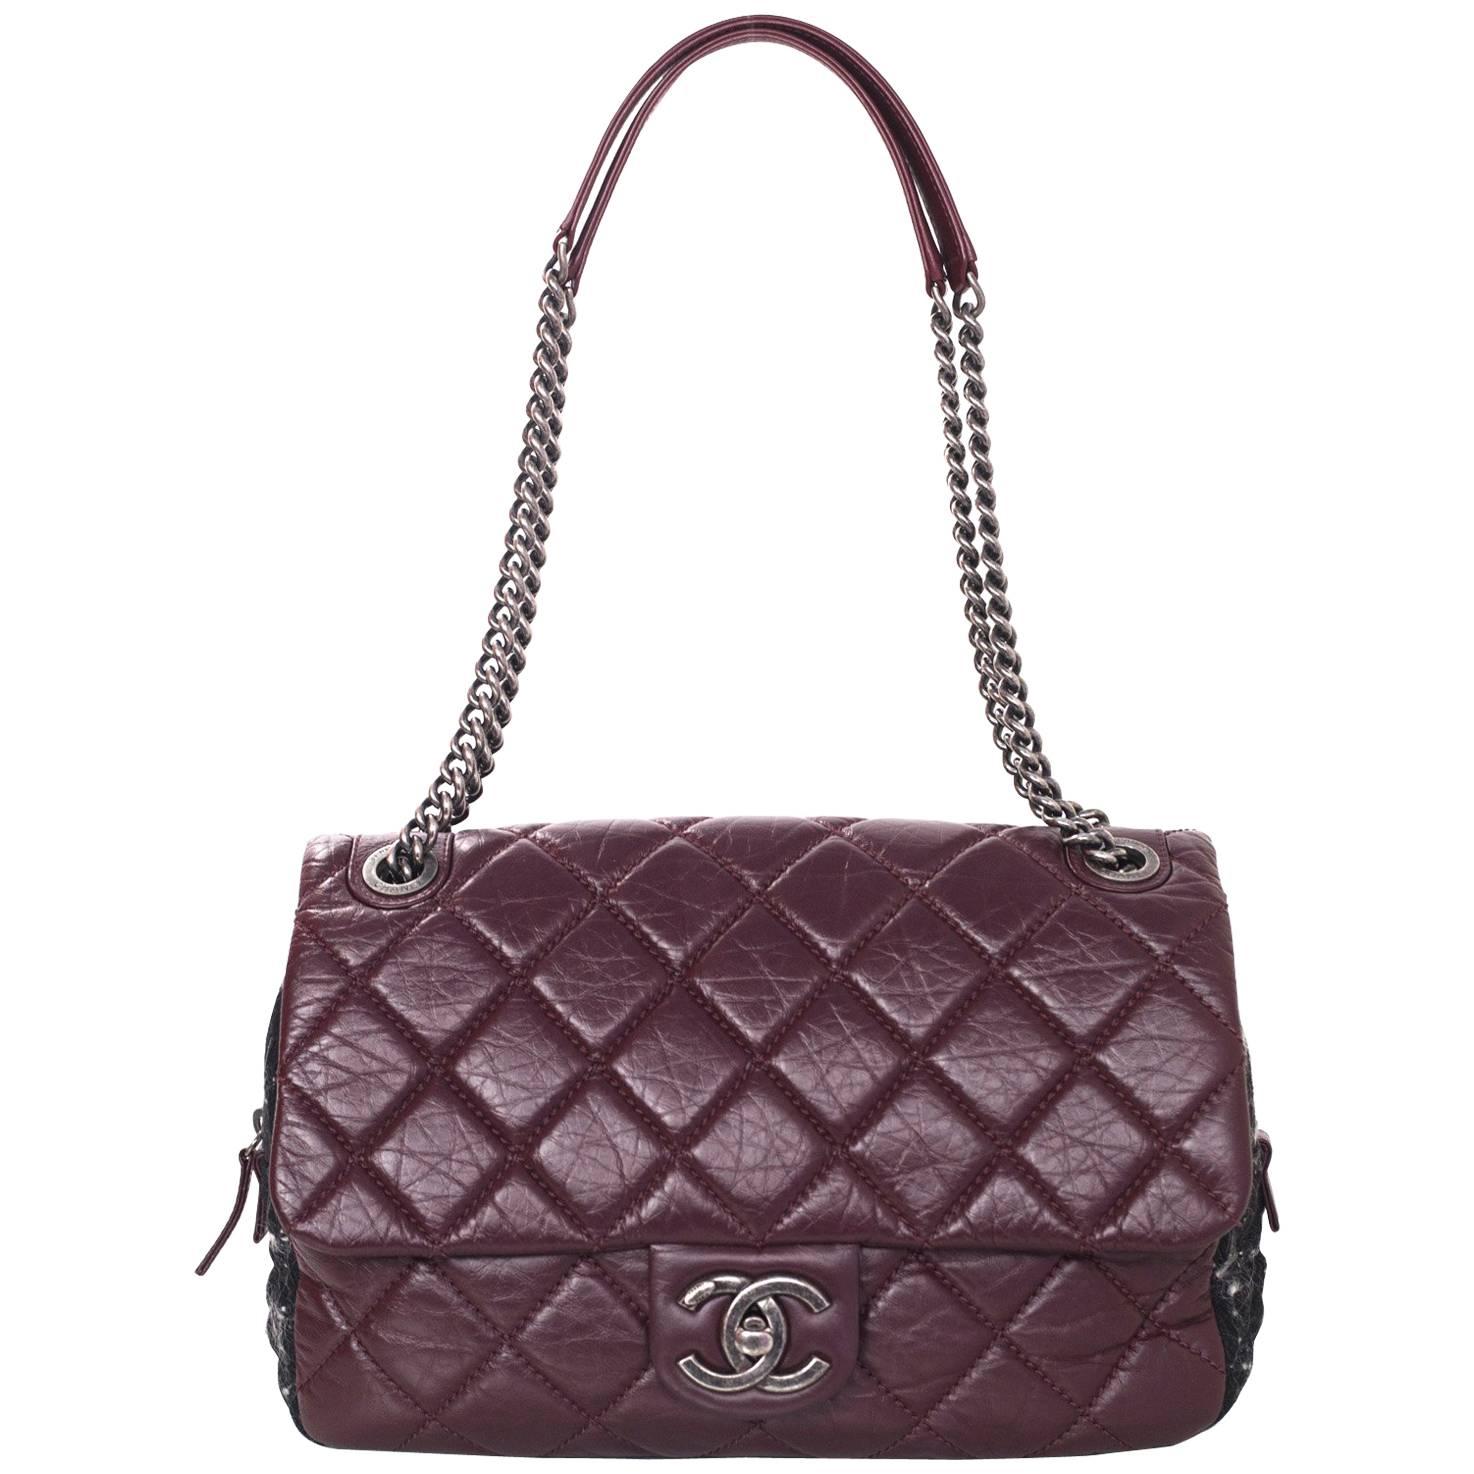 Chanel Burgundy Quilted Distressed Leather Quilted Flap Bag w/ Tweed Trim 